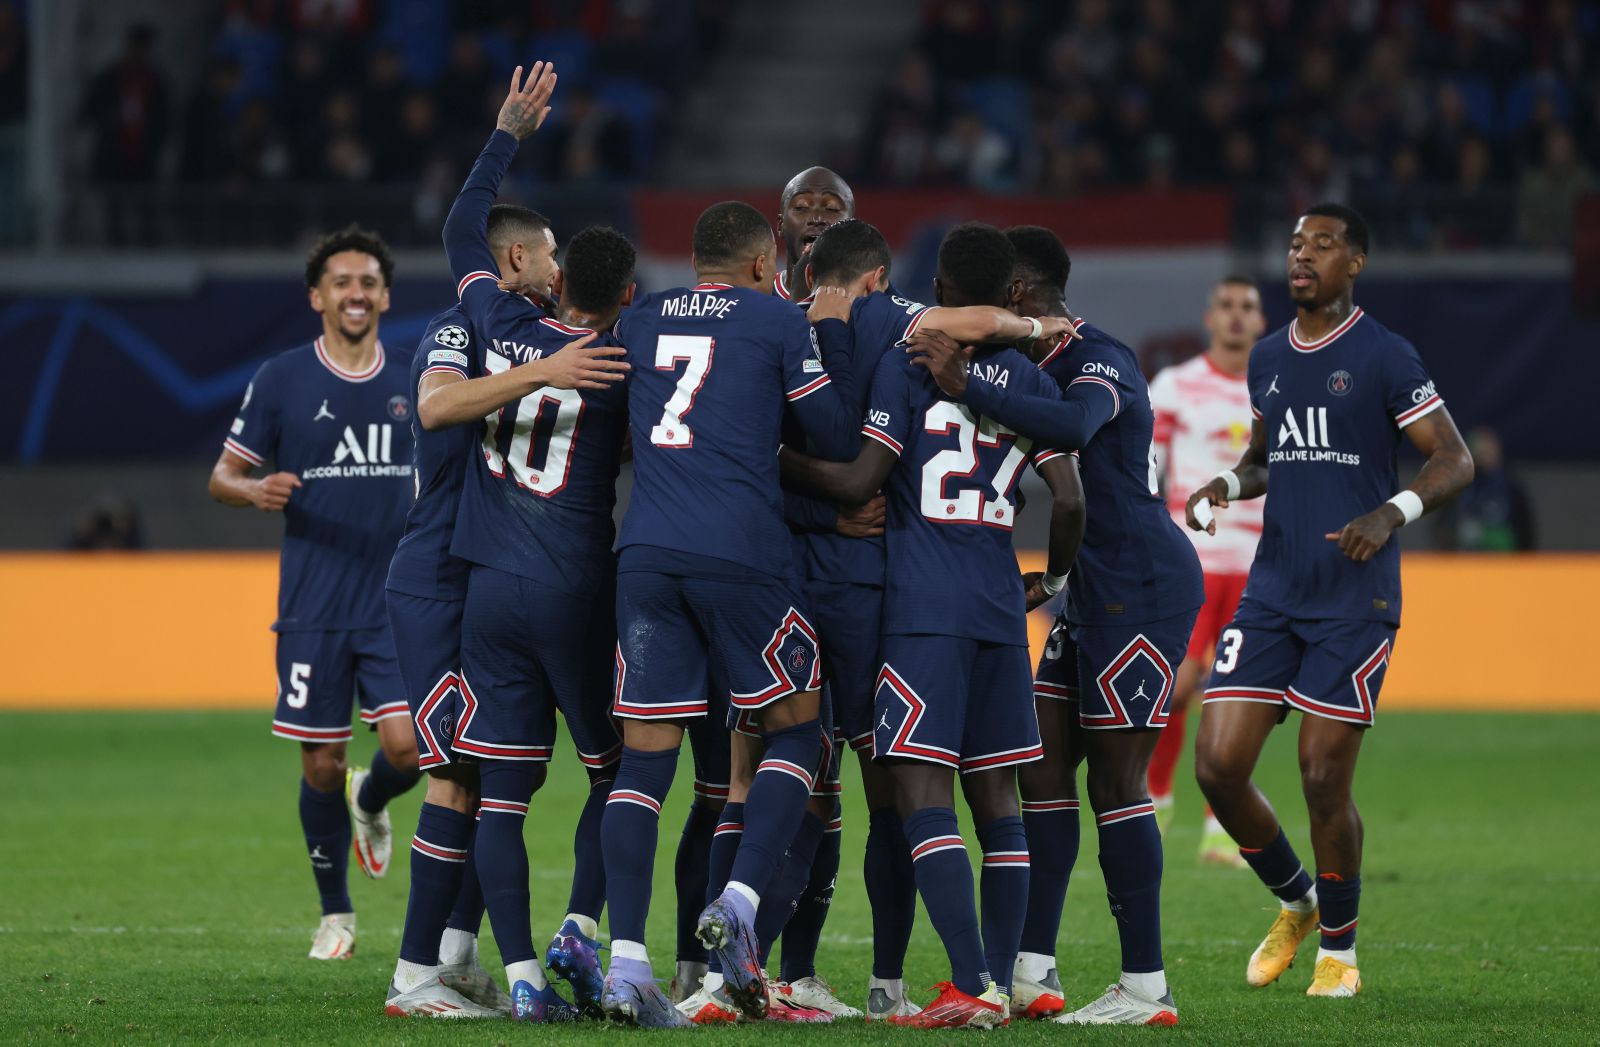 epa09562227 PSG players react after the second goal scored by Paris Saint-Germain's Georginio Wijnaldum (in the middle) during the UEFA Champions League group A soccer match between  RB Leipzig and Paris Saint-Germain (PSG) in Leipzig, Germany, 03 October 2021.  EPA/FILIP SINGER